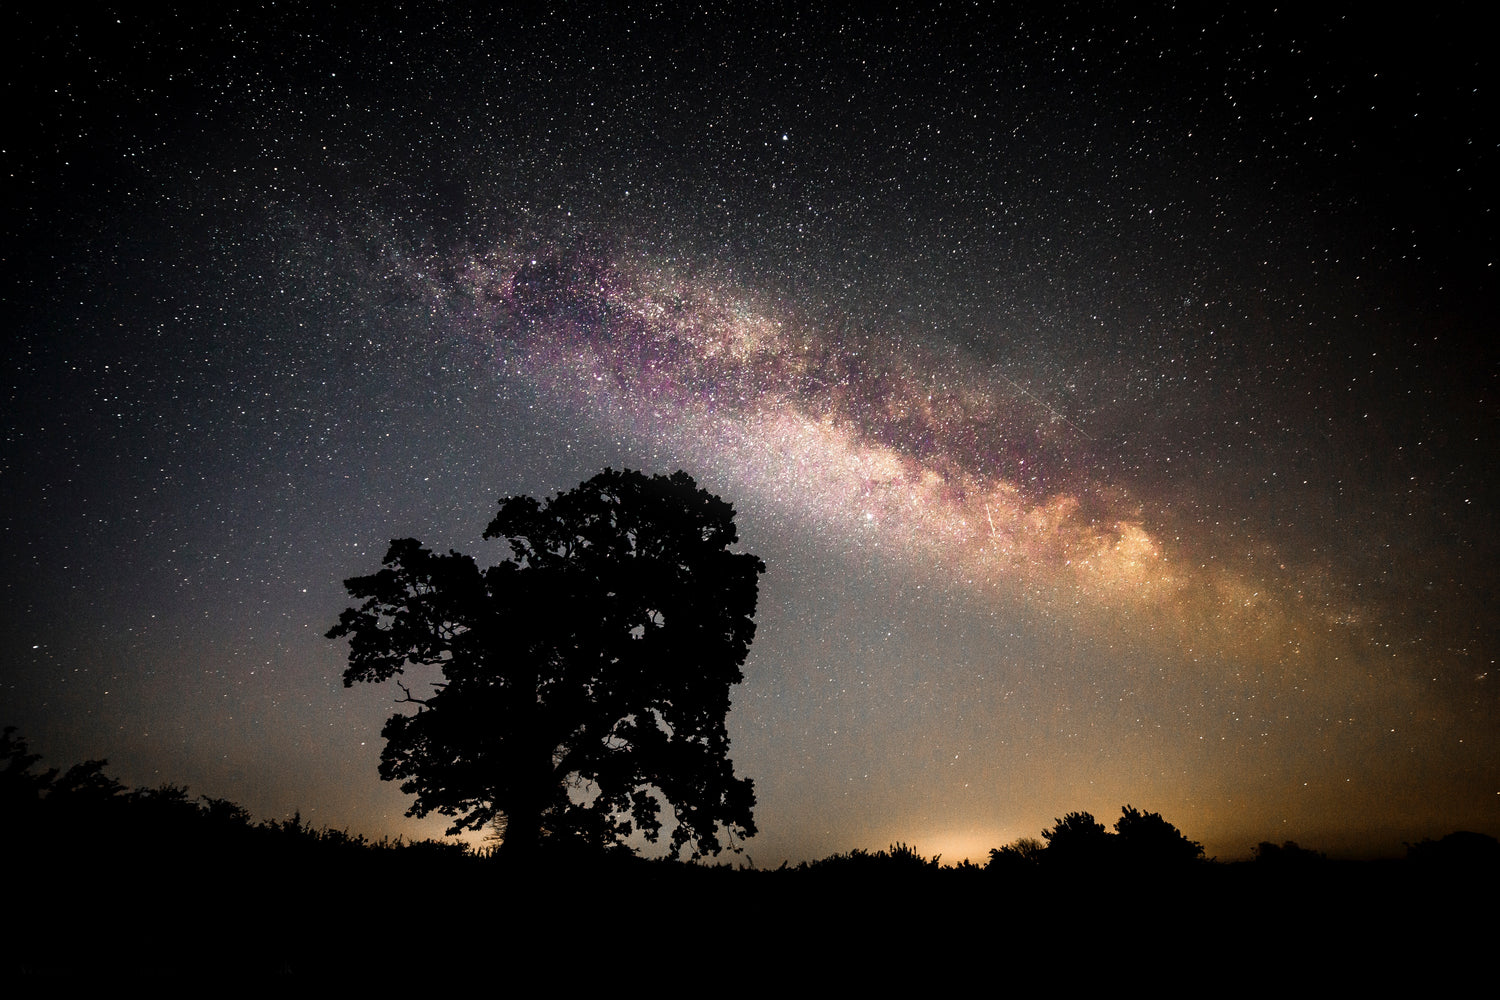 Photo of the Milky Way by Steve Bell